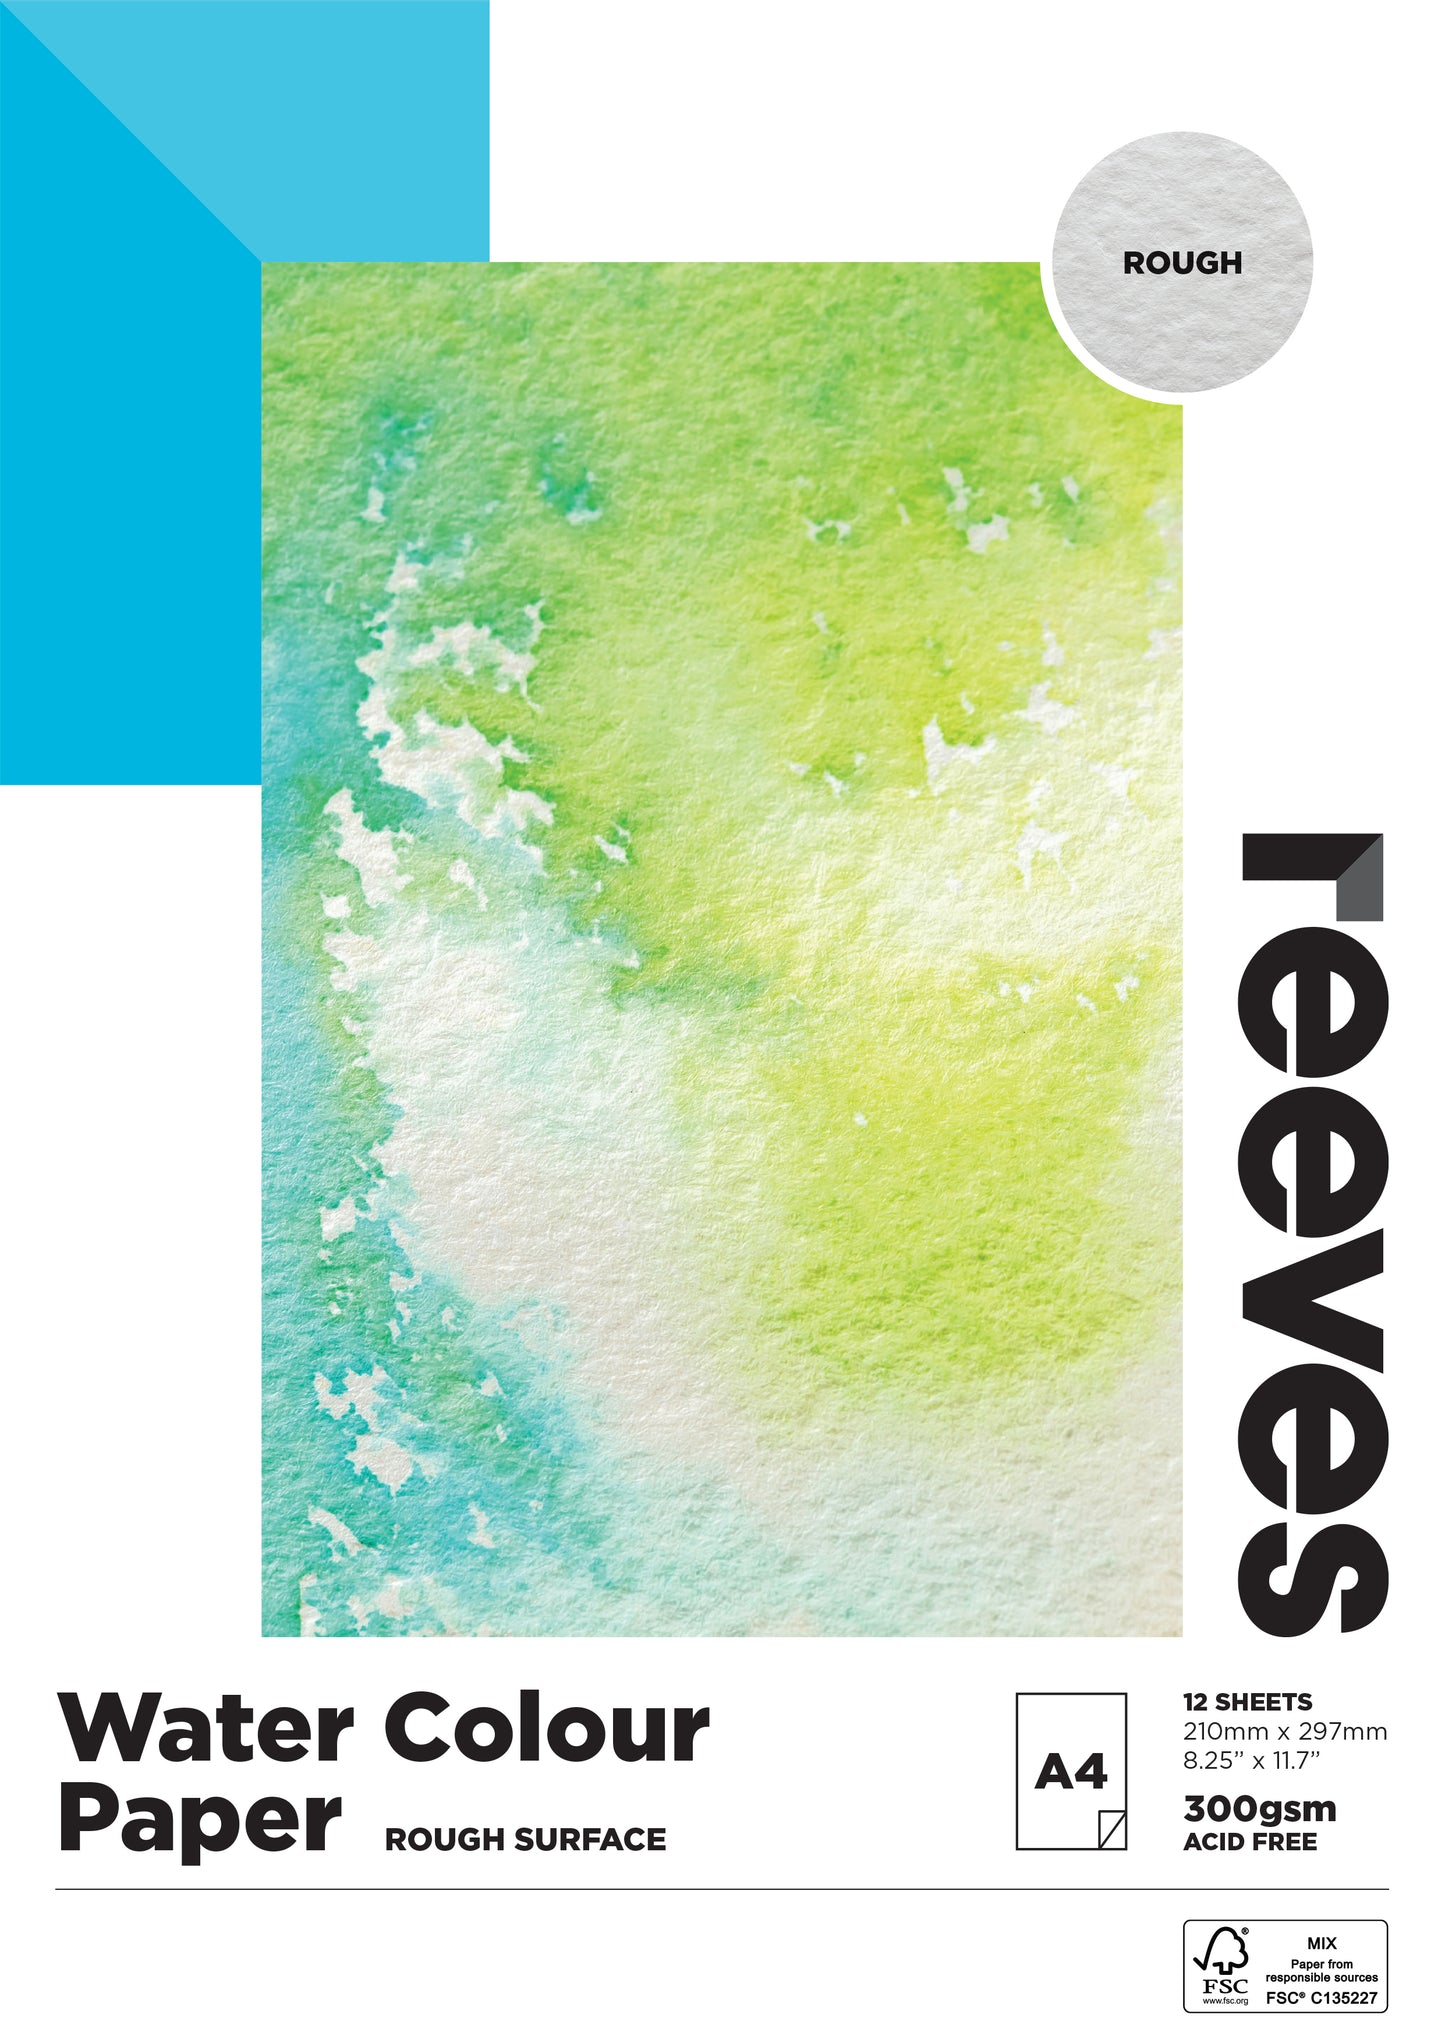 Reeves Watercolour Paper 300gsm 12 Sheets - Rough